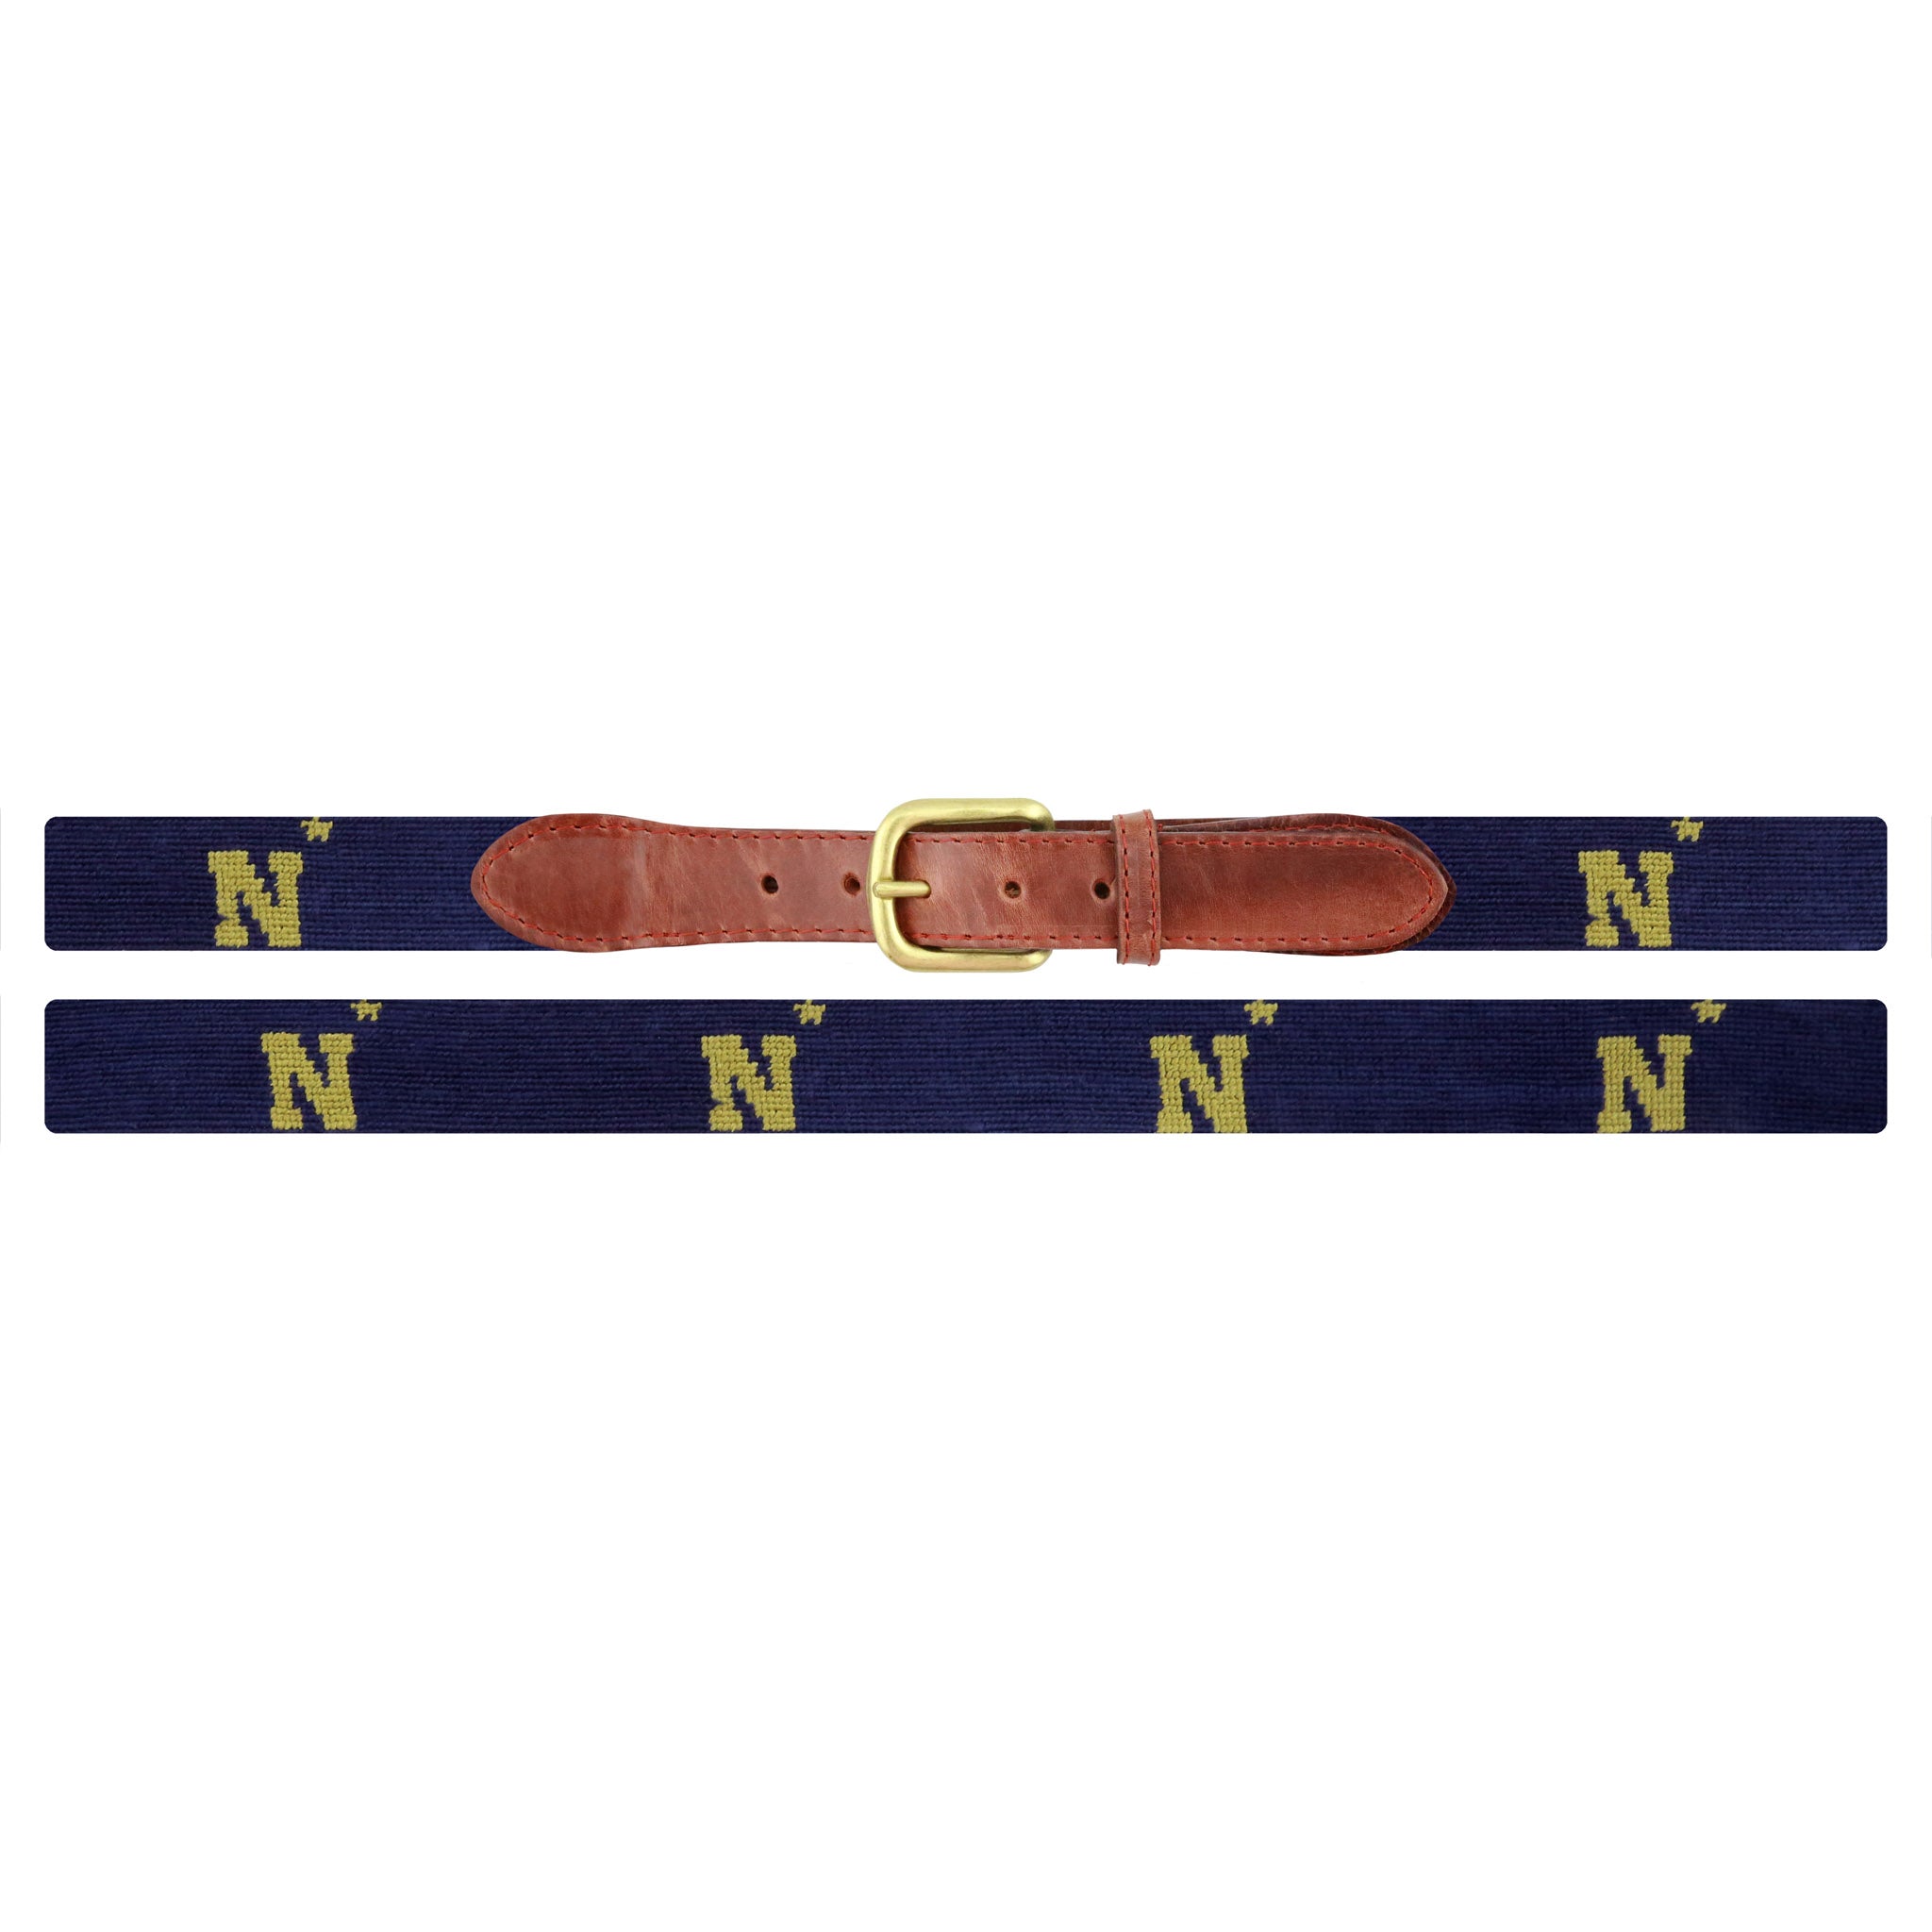 Smathers and Branson Naval Academy Needlepoint Belt Laid Out 